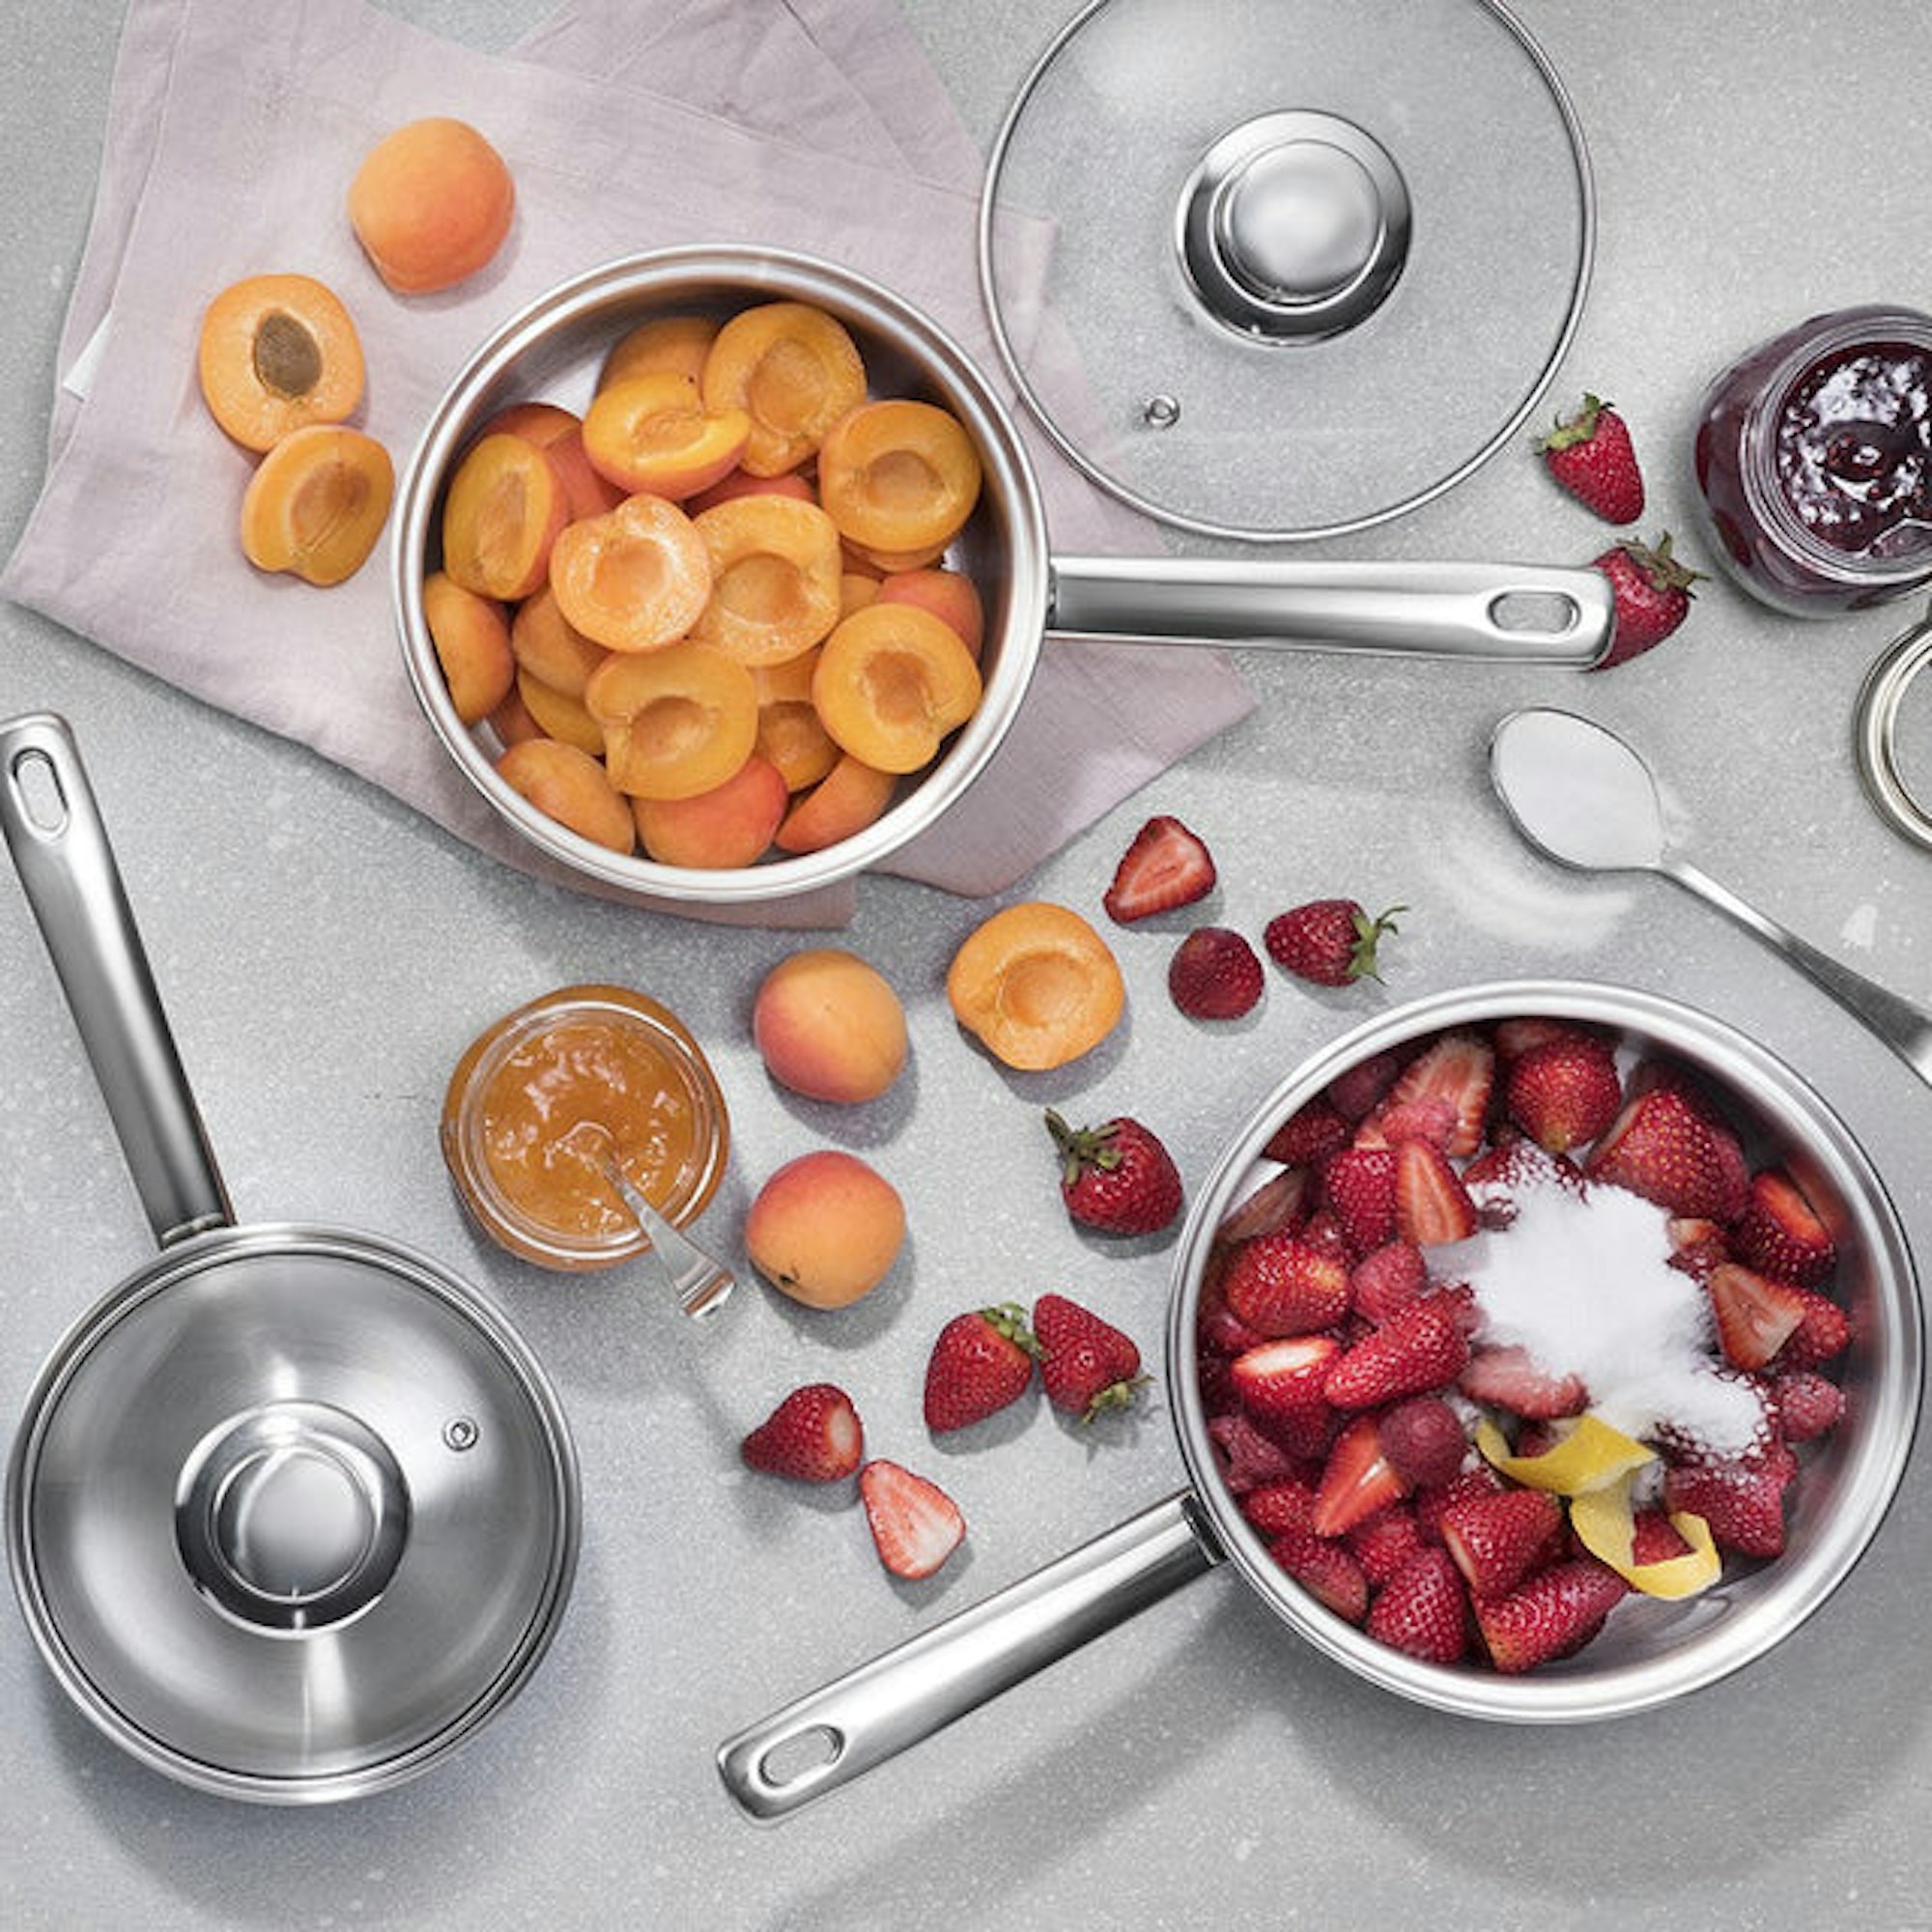 Stainless Steel induction cookware with apricots and strawberries